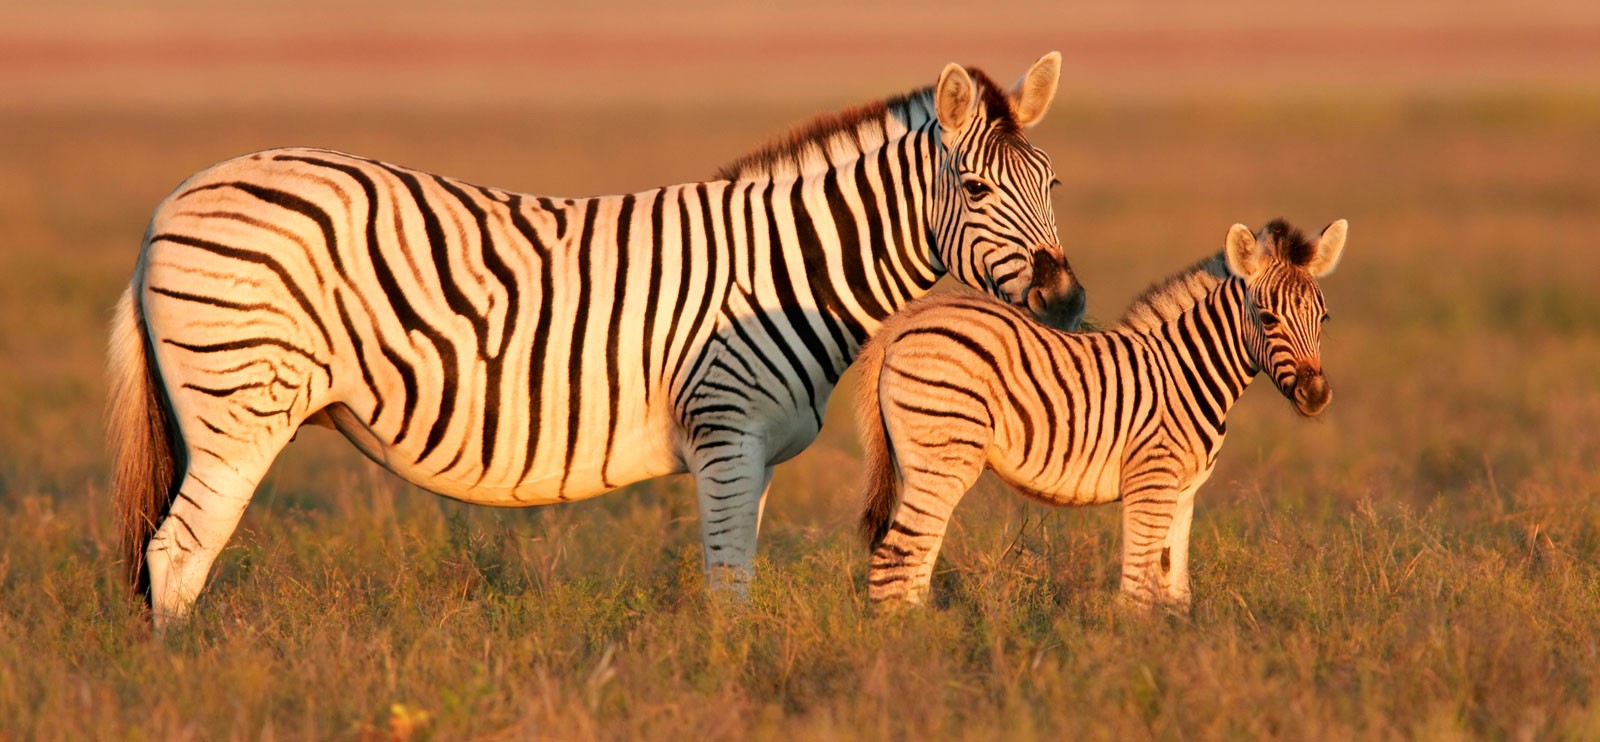 Zebra Facts and Symbolic Meaning